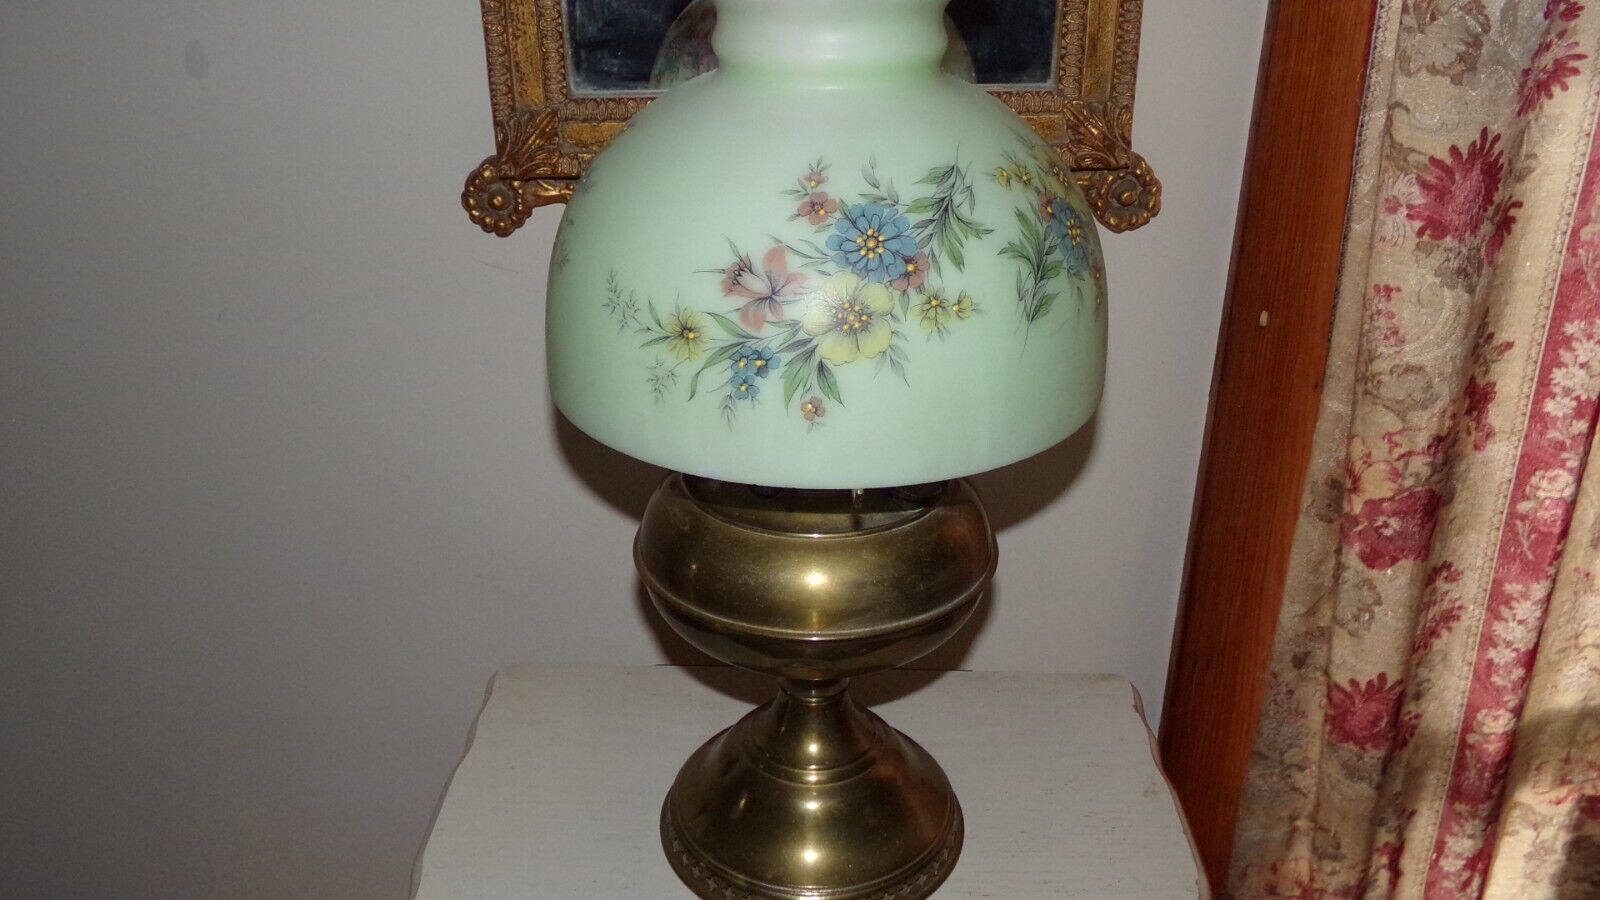 VINTAGE BRASS OIL LAMP WITH FENTON SHADE TEXTERED BLUE FLOWERS MINT GREEN SHADE - $88.78